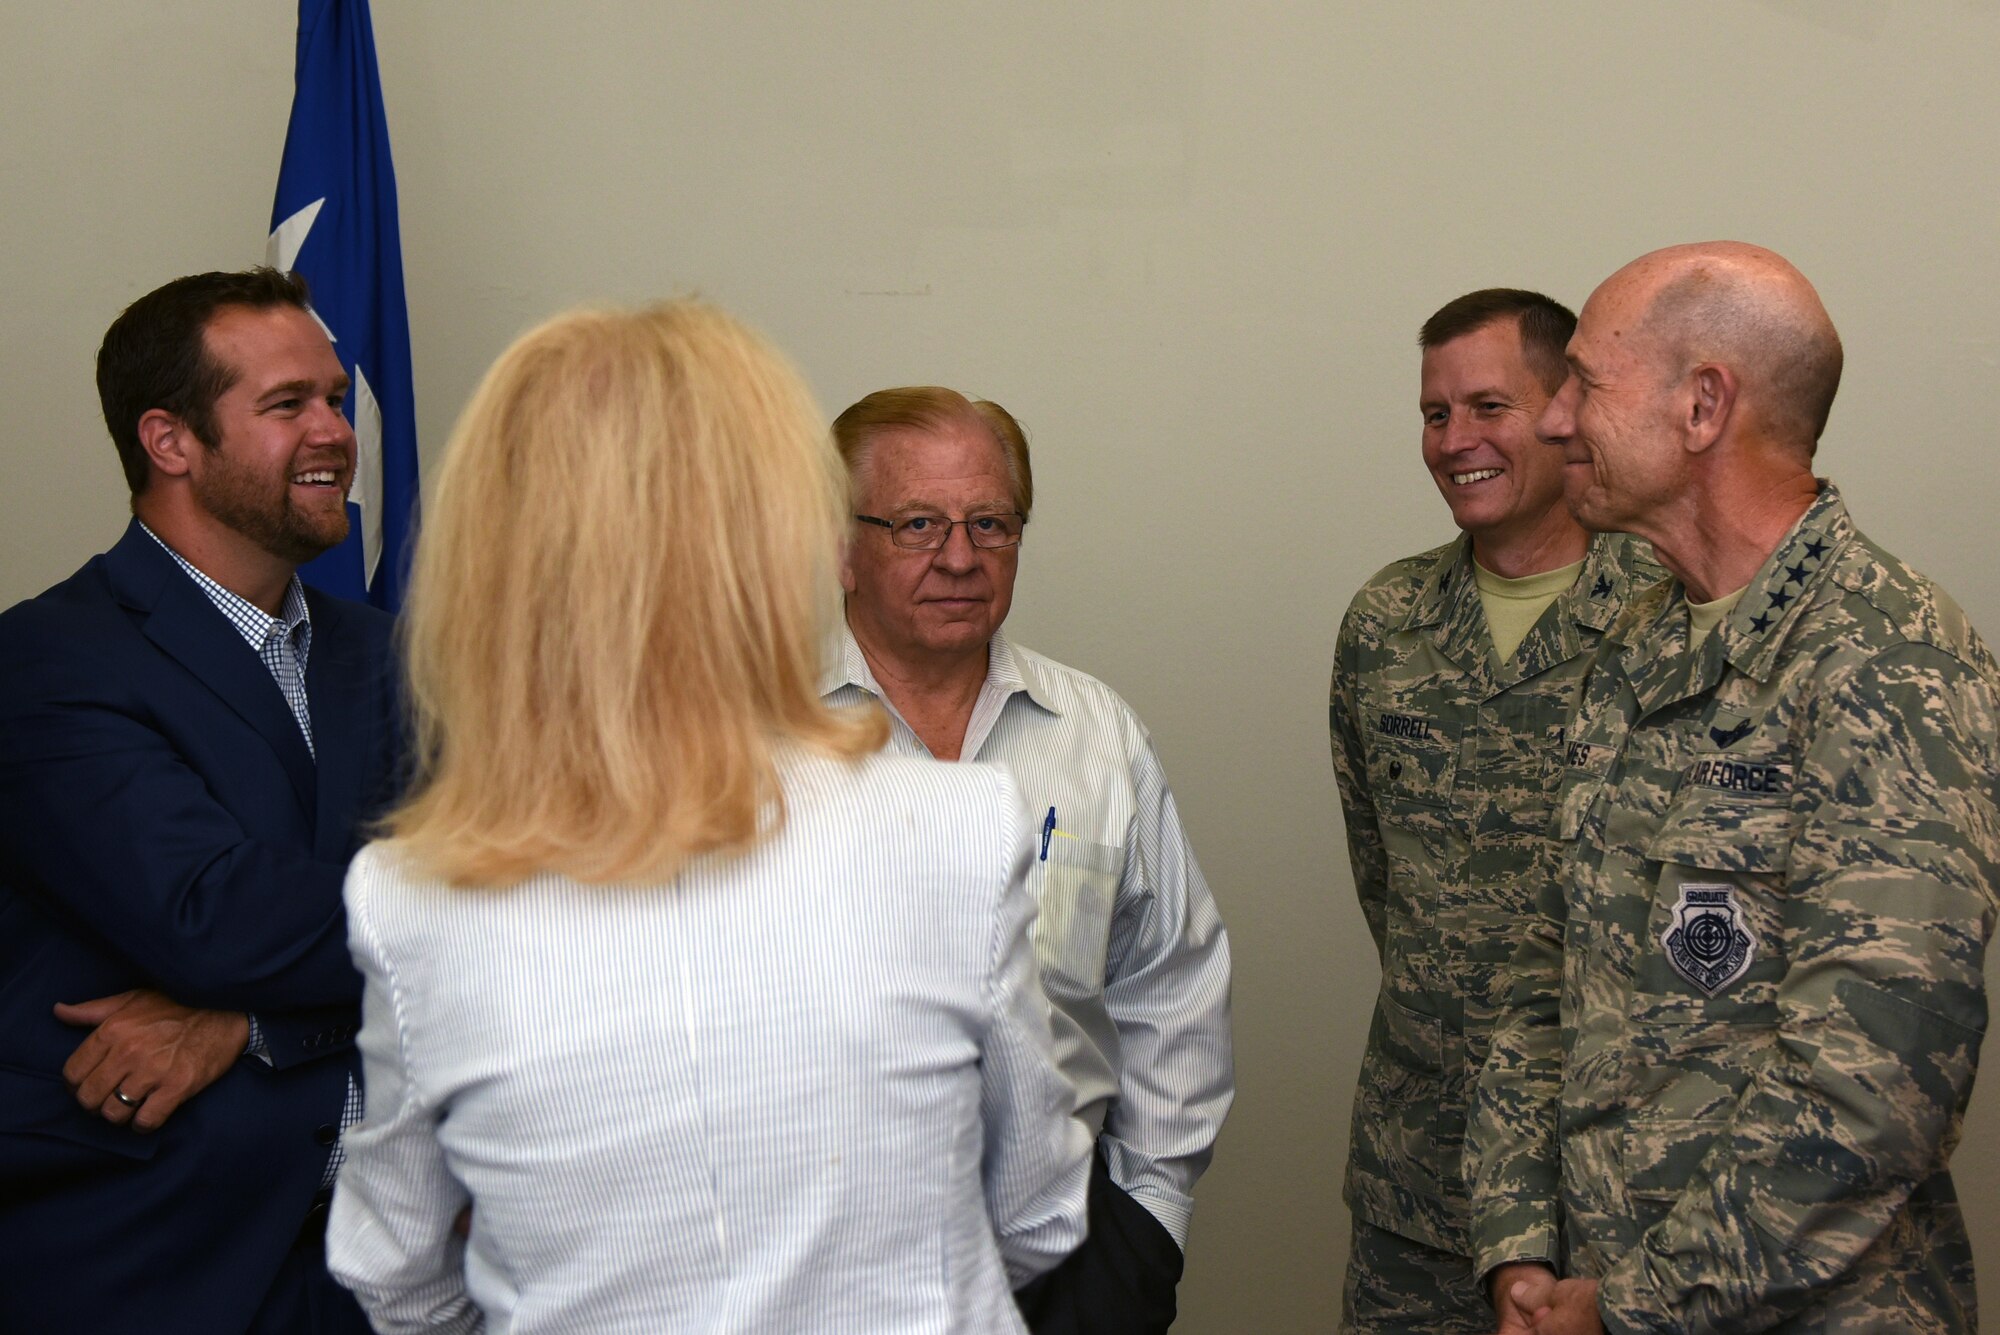 U.S. Air Force Gen. Mike Holmes, Commander of Air Combat Command, speaks to San Angelo community leaders at the Event Center on Goodfellow Air Force Base, Texas, May 30, 2018. Holmes thanked the civic leaders for their continued support to Goodfellow and for improving the lives of the Airmen who live here. (U.S. Air Force photo by Staff Sgt. Joshua Edwards/Released)